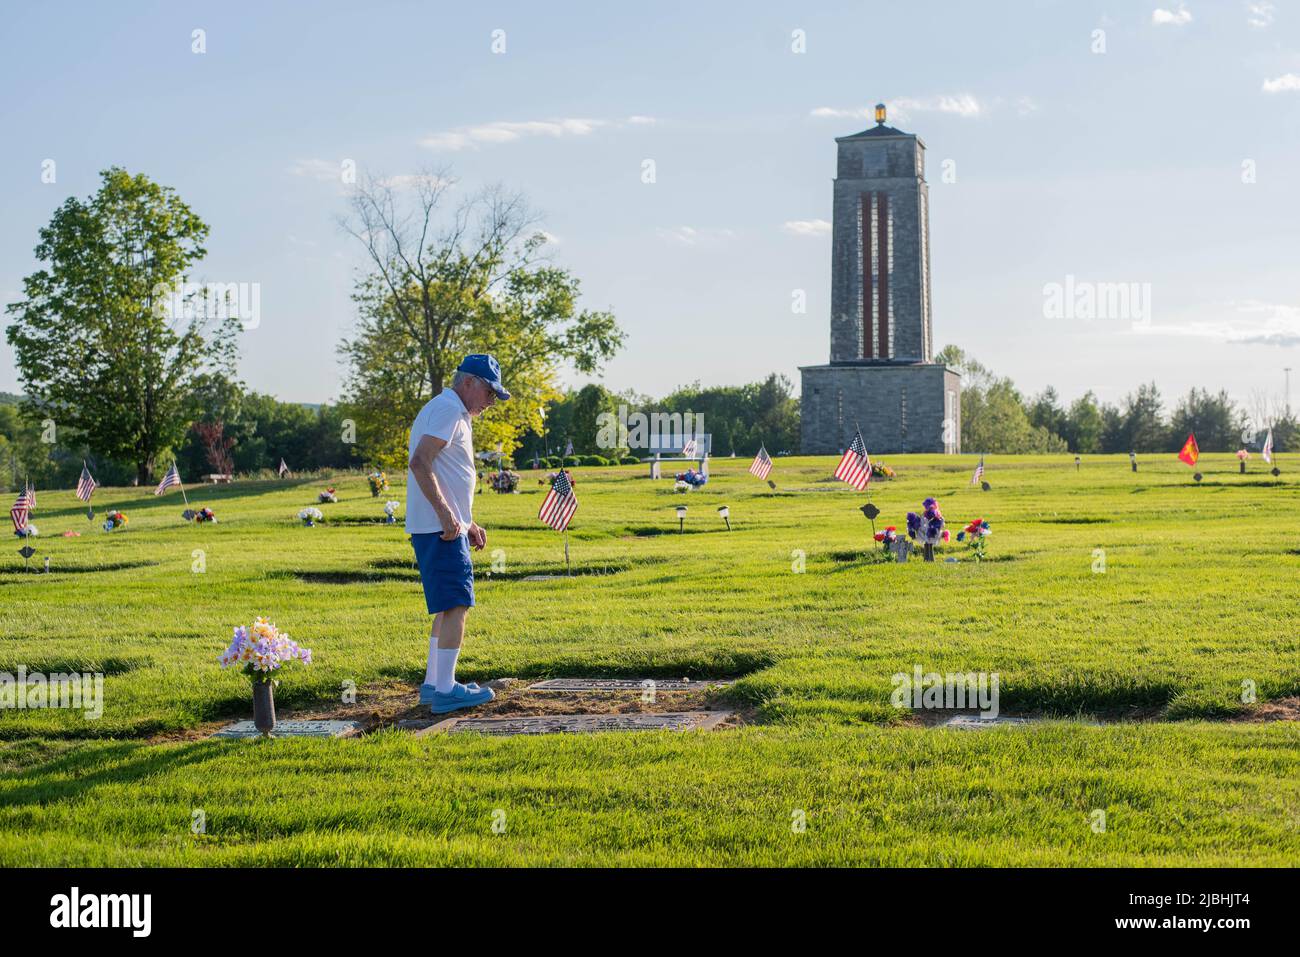 A man tends to a grave at a cemetery in rural Pennsylvania on Memorial Day. Stock Photo